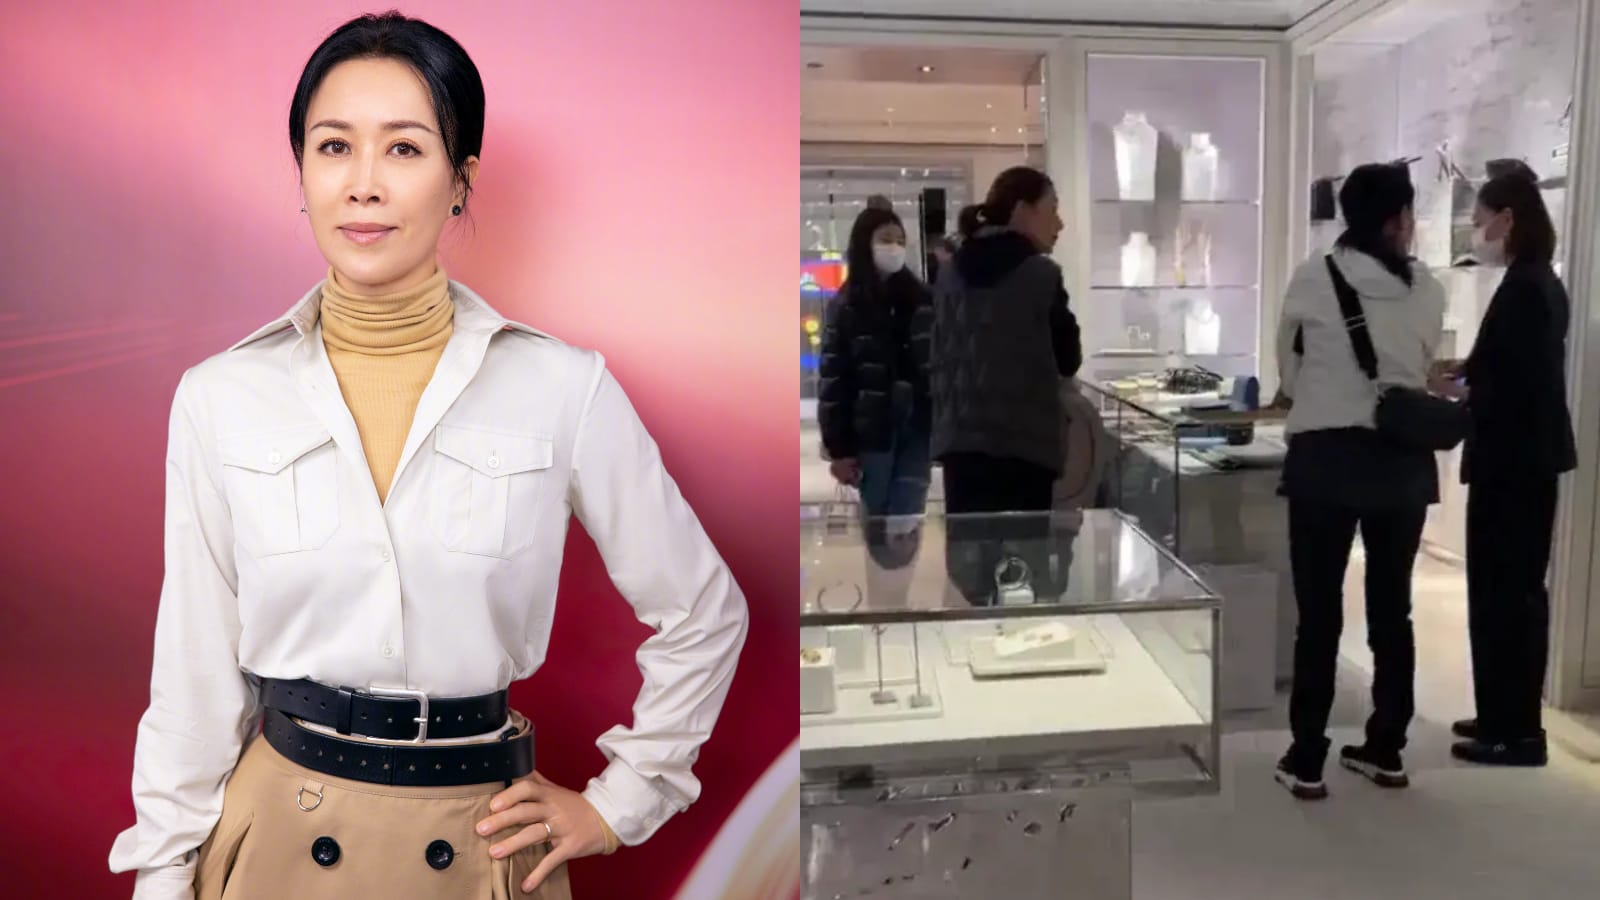 Netizen Claims They Saw Na Ying Being “Fierce” To Her 14-Year-Old Daughter While Shopping In London